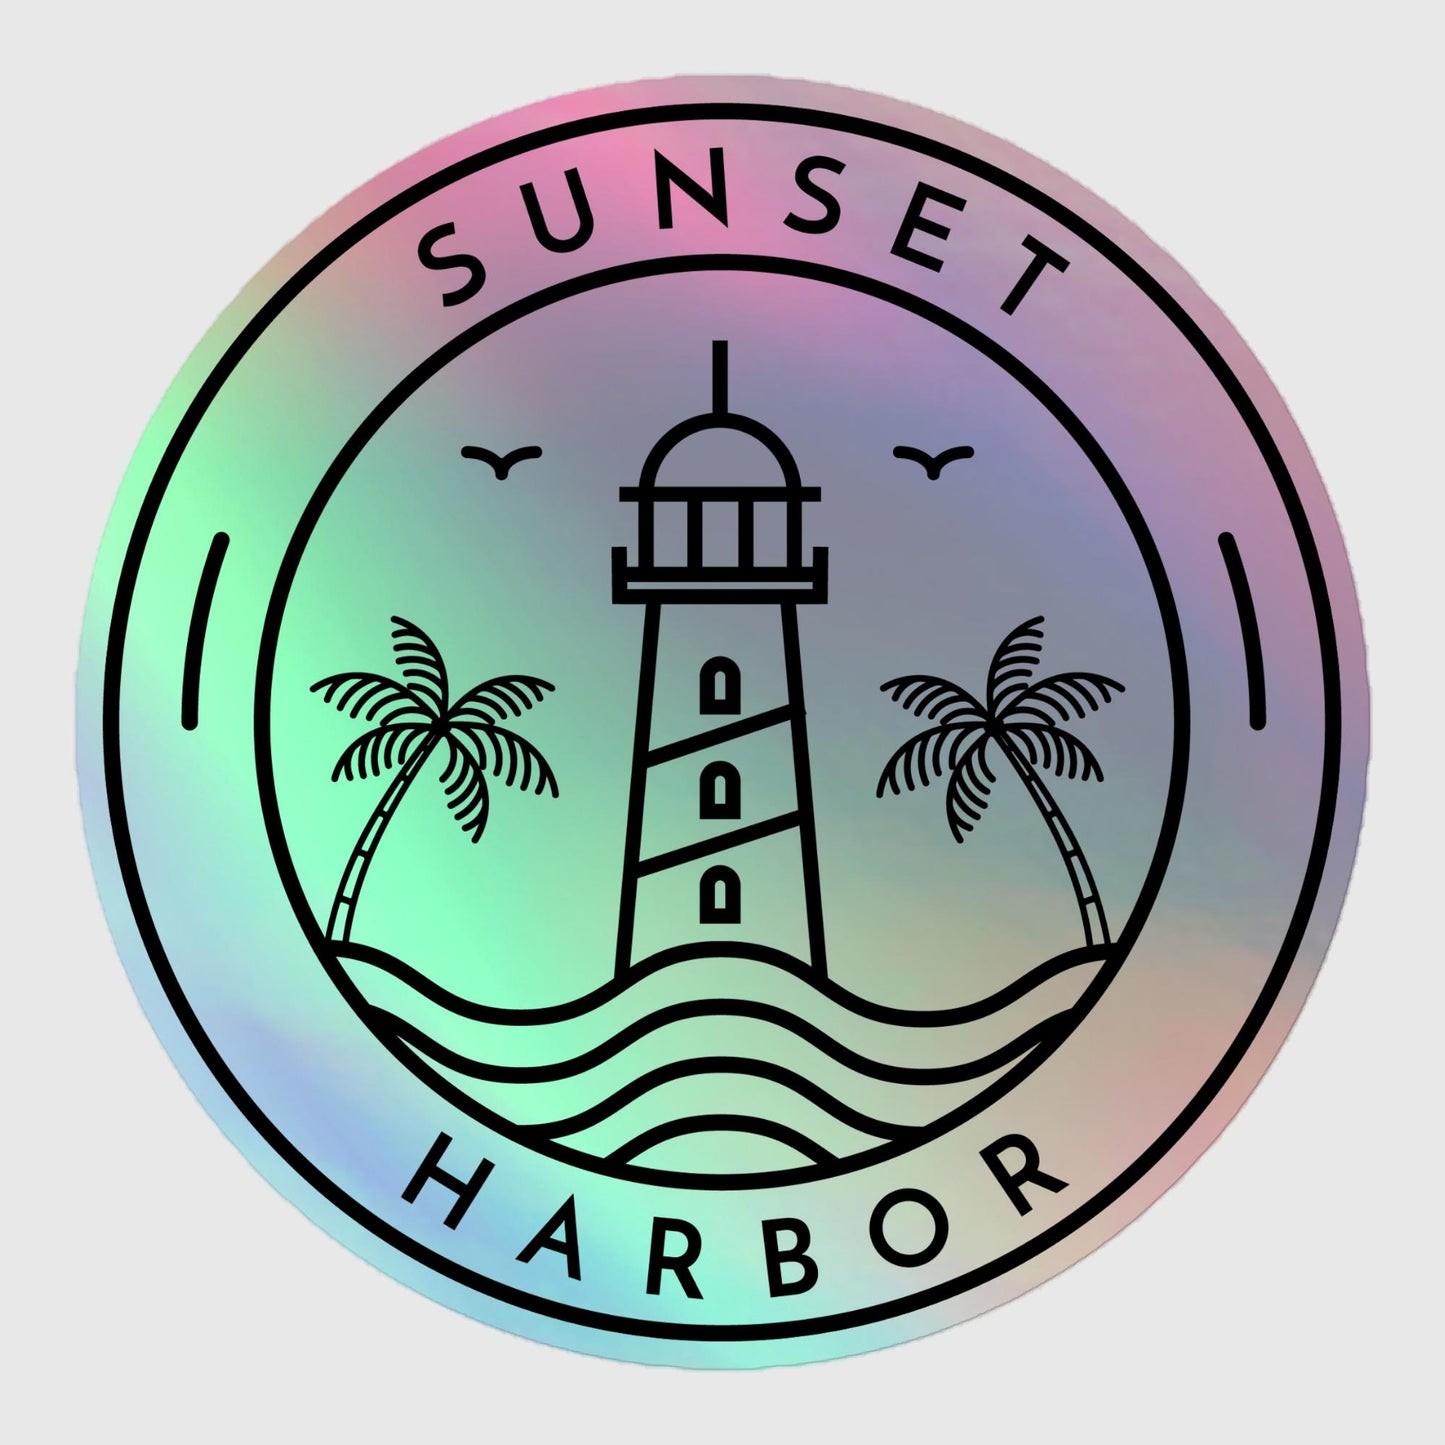 Holographic stickers - Sunset Harbor